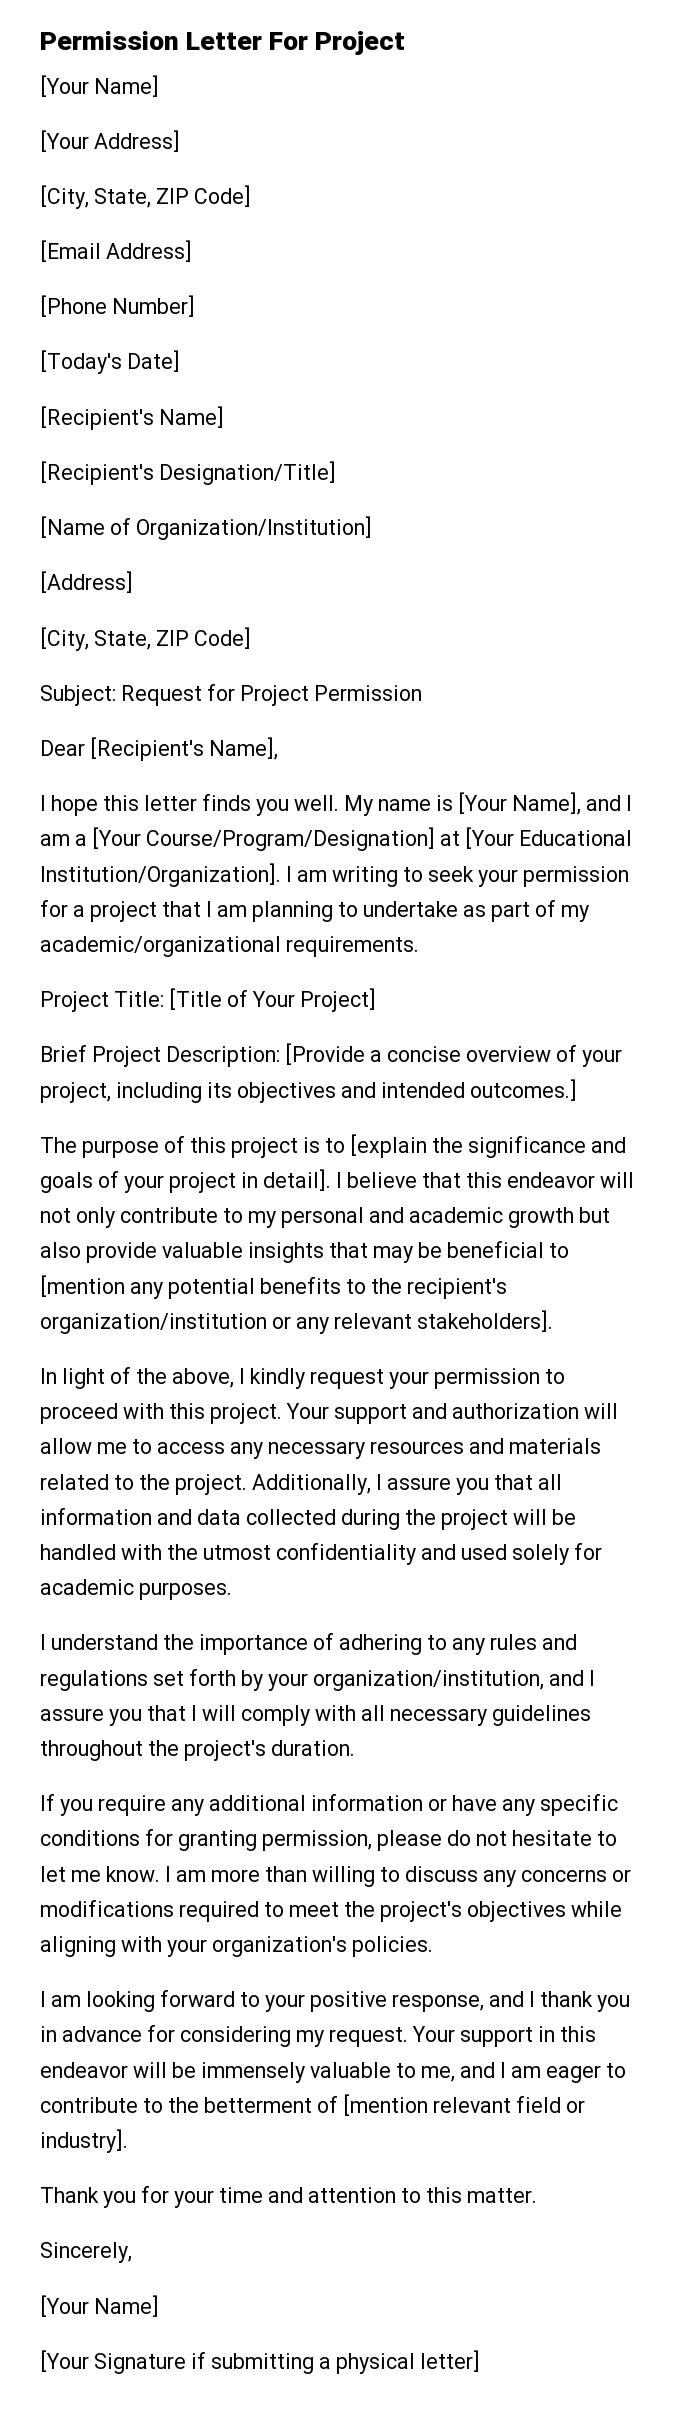 Permission Letter For Project